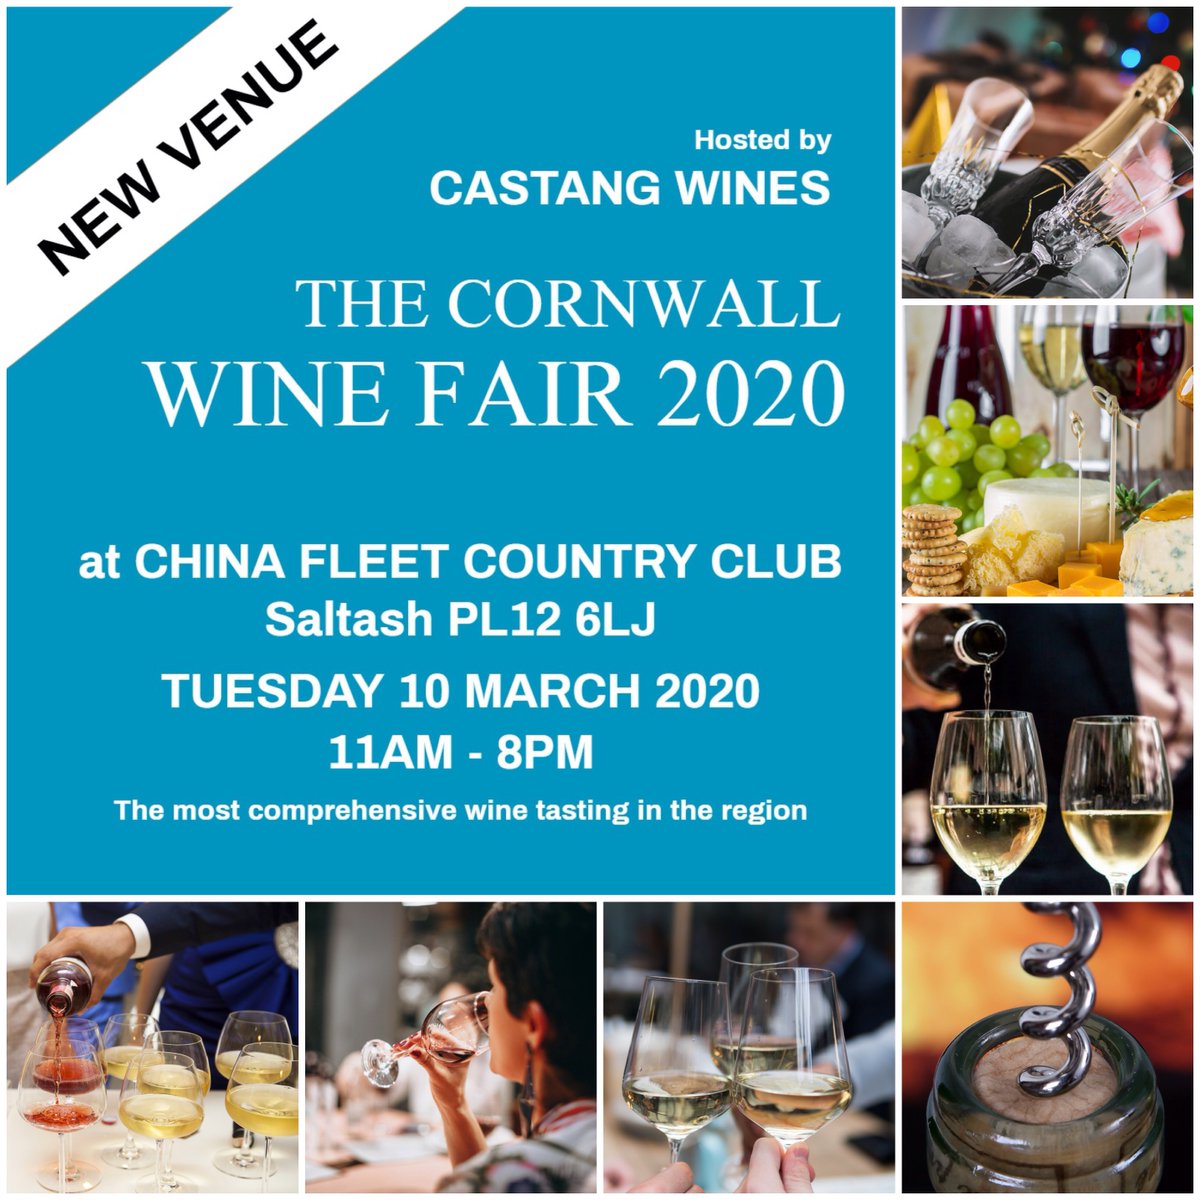 Whether you're in the hospitality business or just a lover of fine wines & spirits, come along to The Cornwall Wine Fair 2020. Over 300 wines, spirits and Champagnes will be open for tasting & the @Castang_wines team will be on hand to offer friendly advice during your visit.